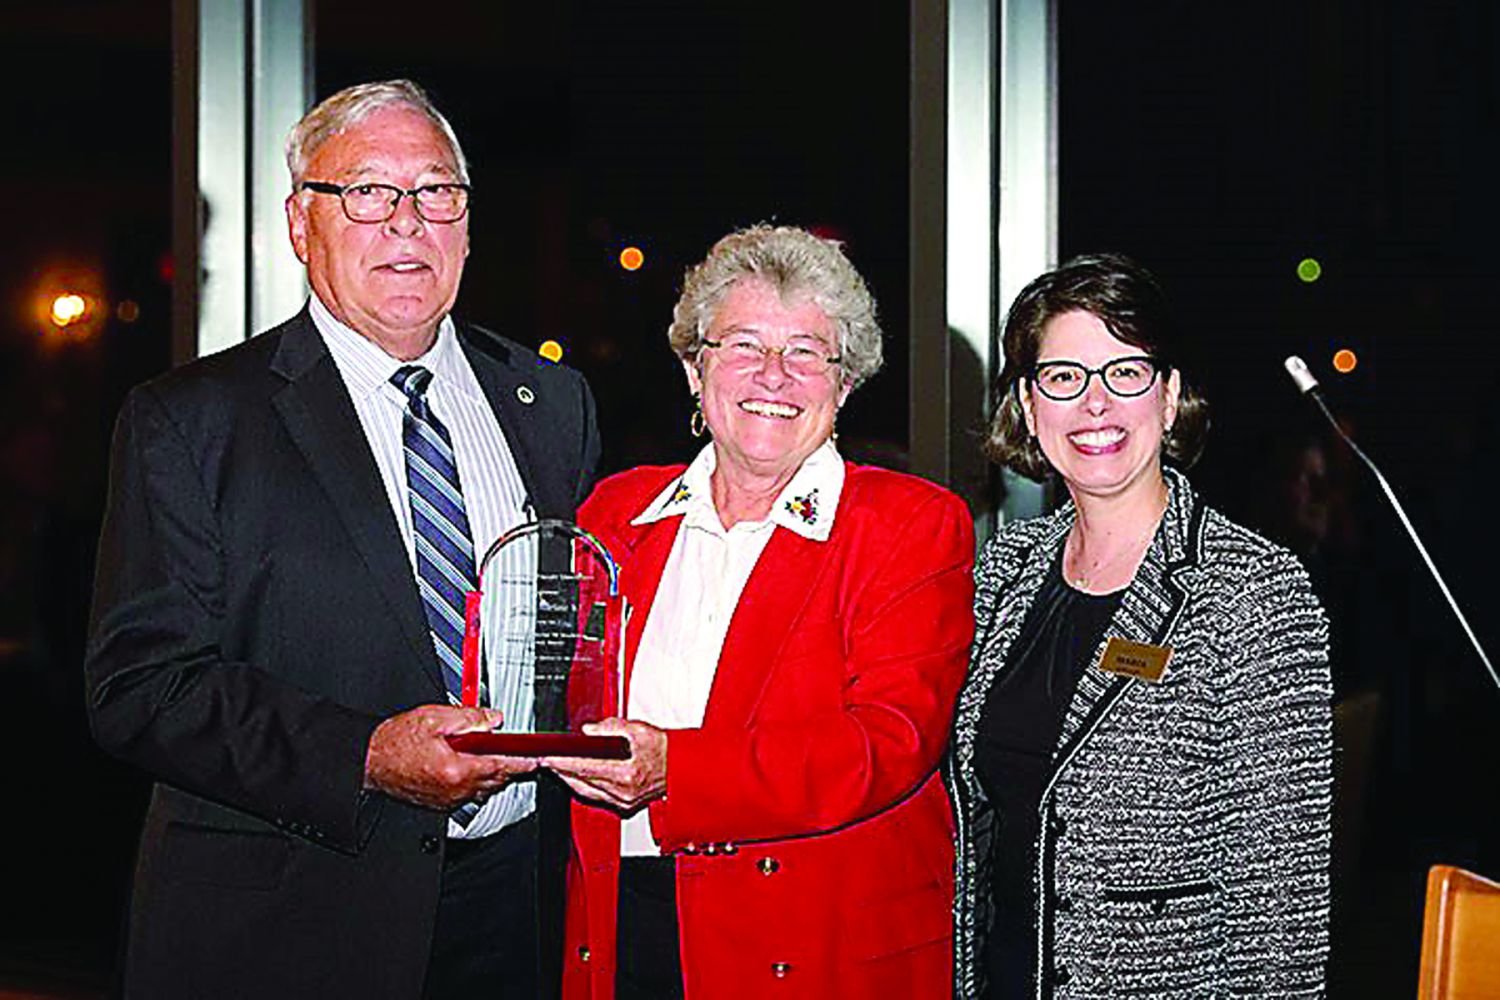 Jim Harteis, Class of 1965, with Patricia C. Hilton, Class of 1976, center, and DelVal President Dr. Maria Gallo, right. Harteis received the Patricia C. Hilton Volunteer Service Award at the university’s 1896 Society Dinner. Photograph courtesy of Delaware Valley University.